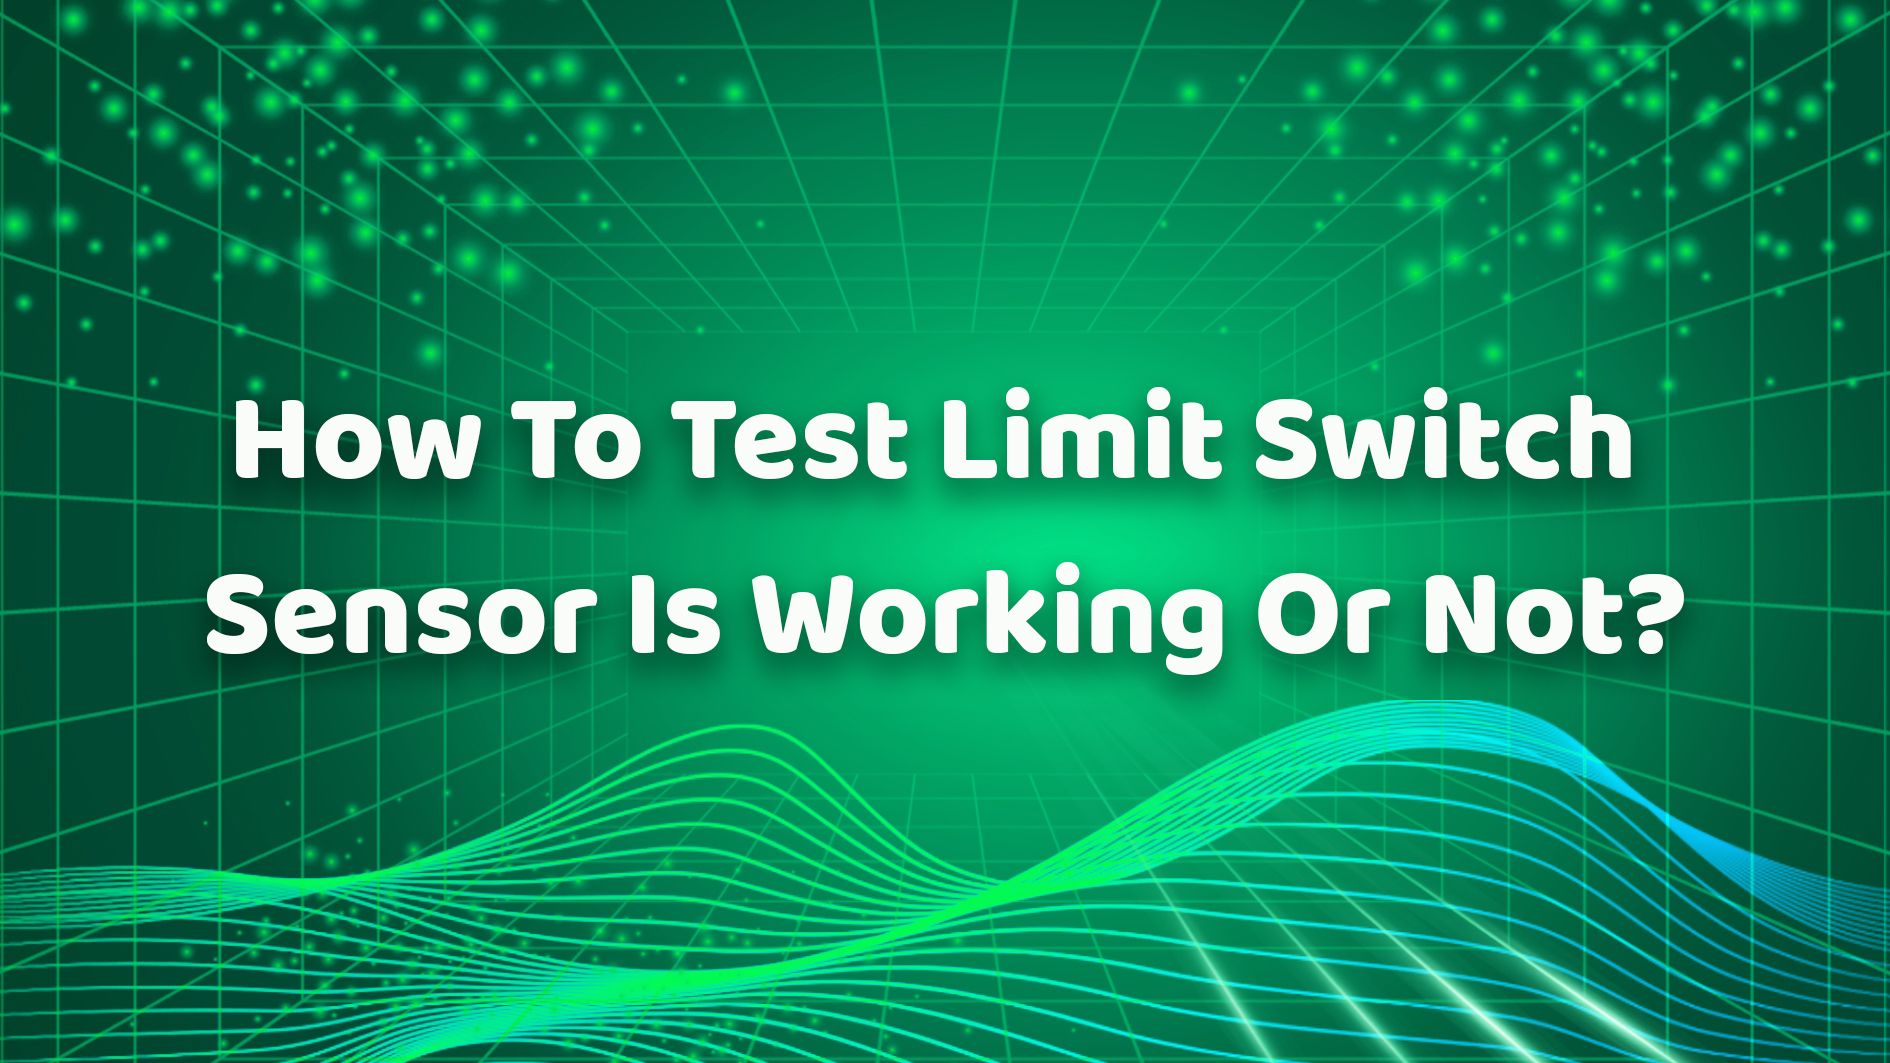 How To Test Limit Switch Sensor Is Working Or Not？